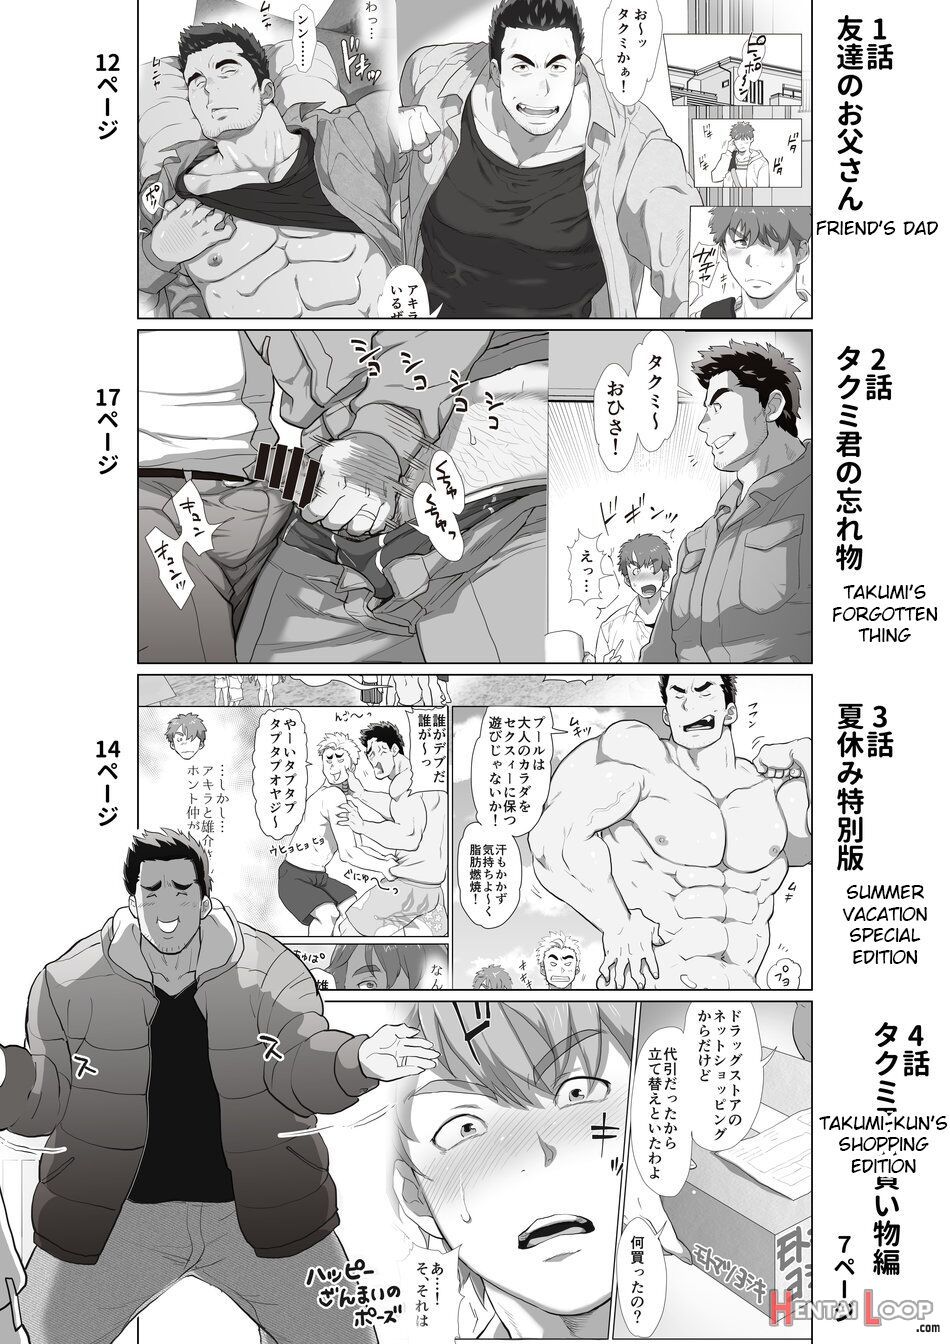 Friend’s Dad Chapter 1 page 2